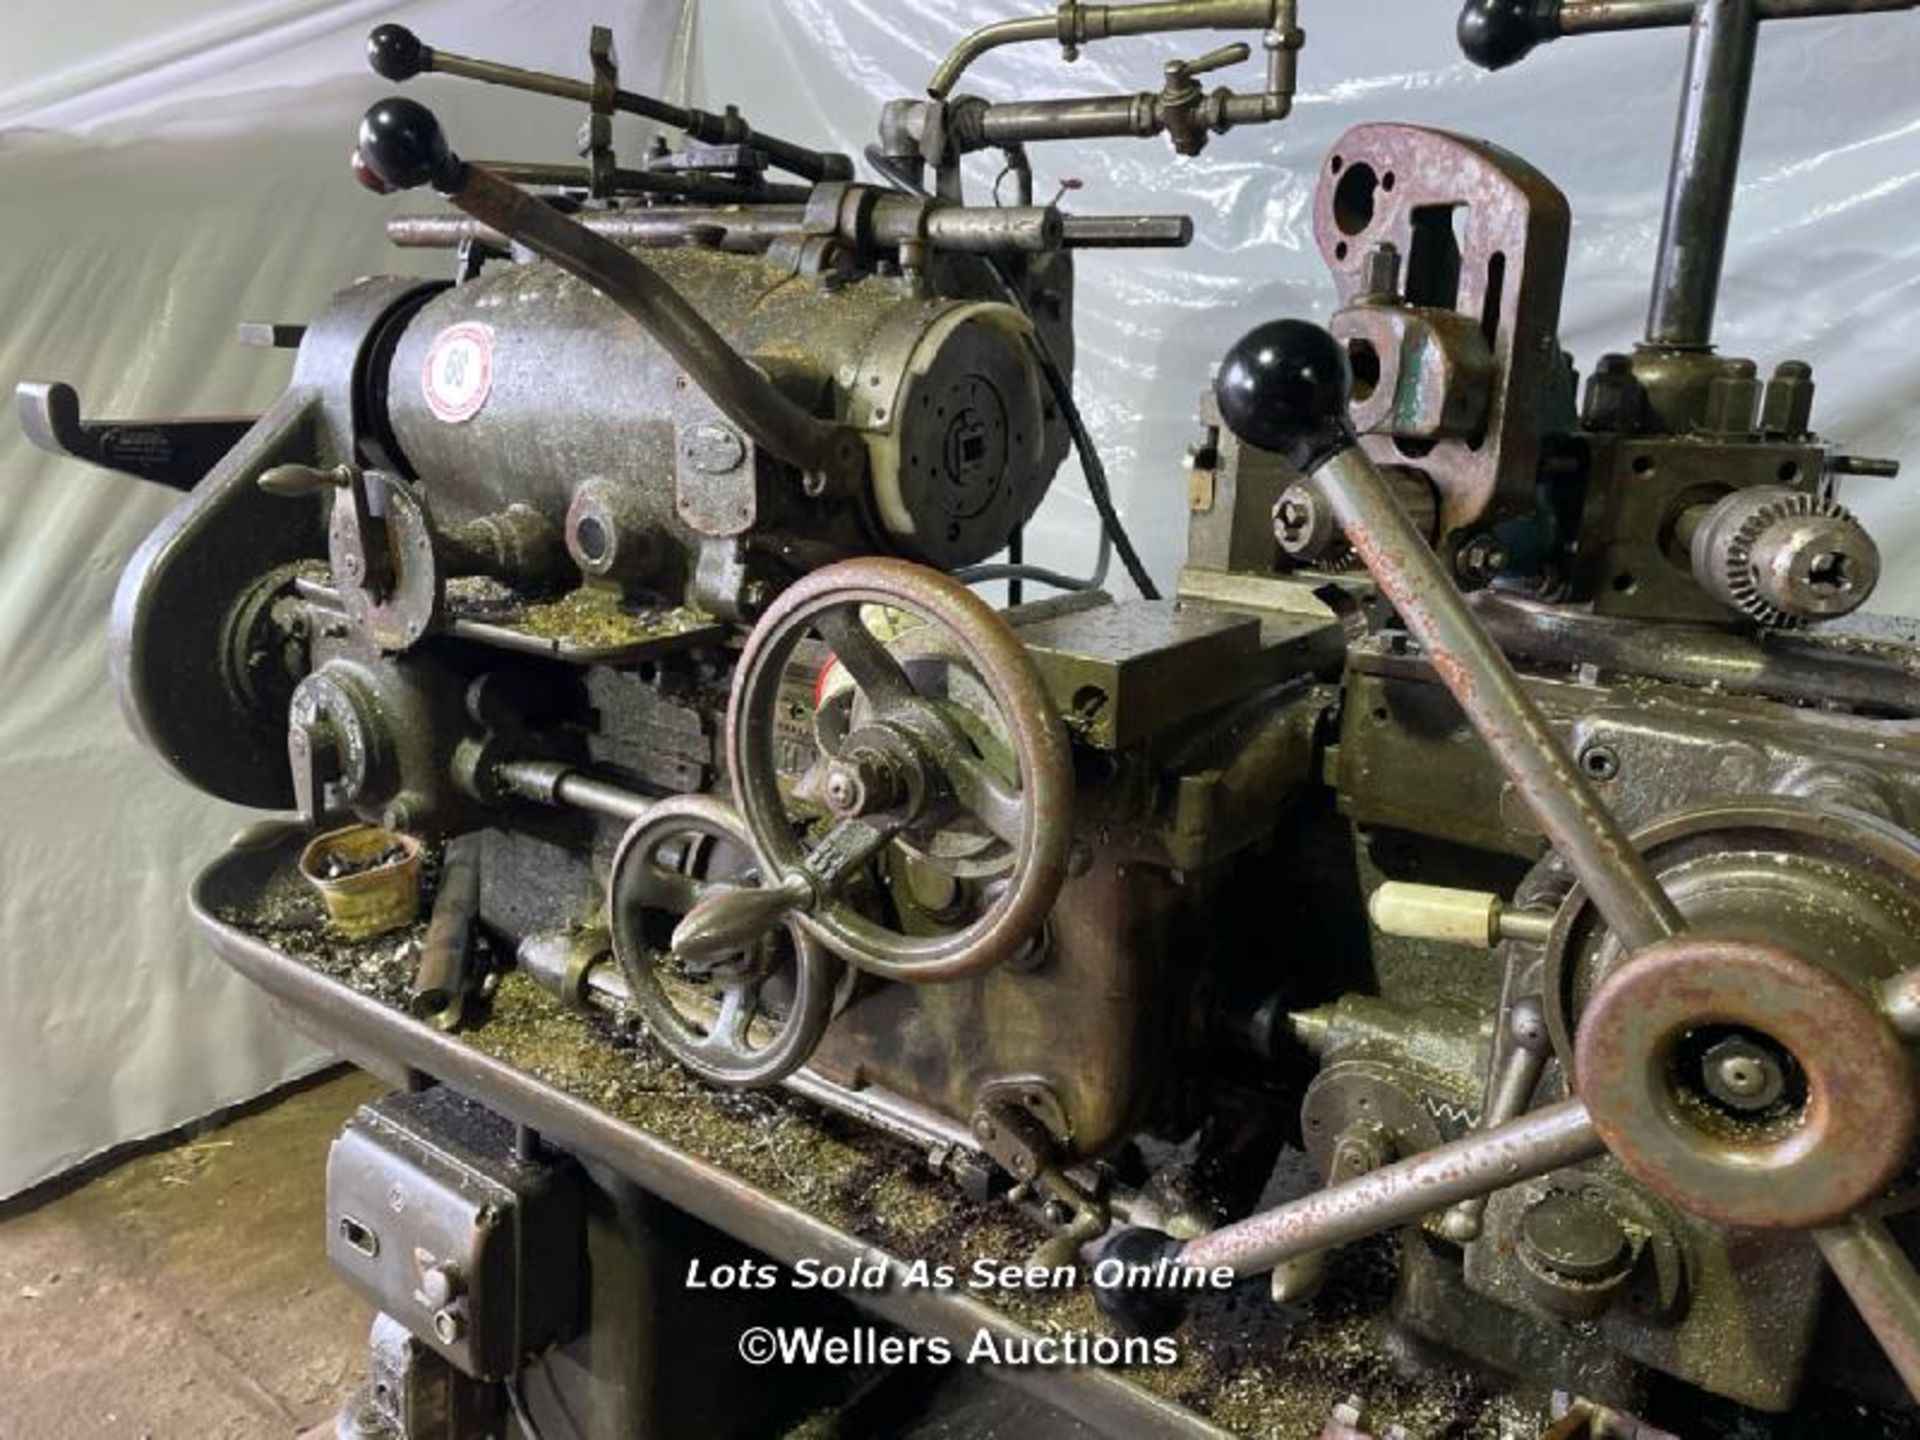 H. W. WARD AND SON CAPSTAN 2A LATHE, 3 PHASE, INCL. 3 JAW CHUCK, IN WORKING ORDER - Image 4 of 9